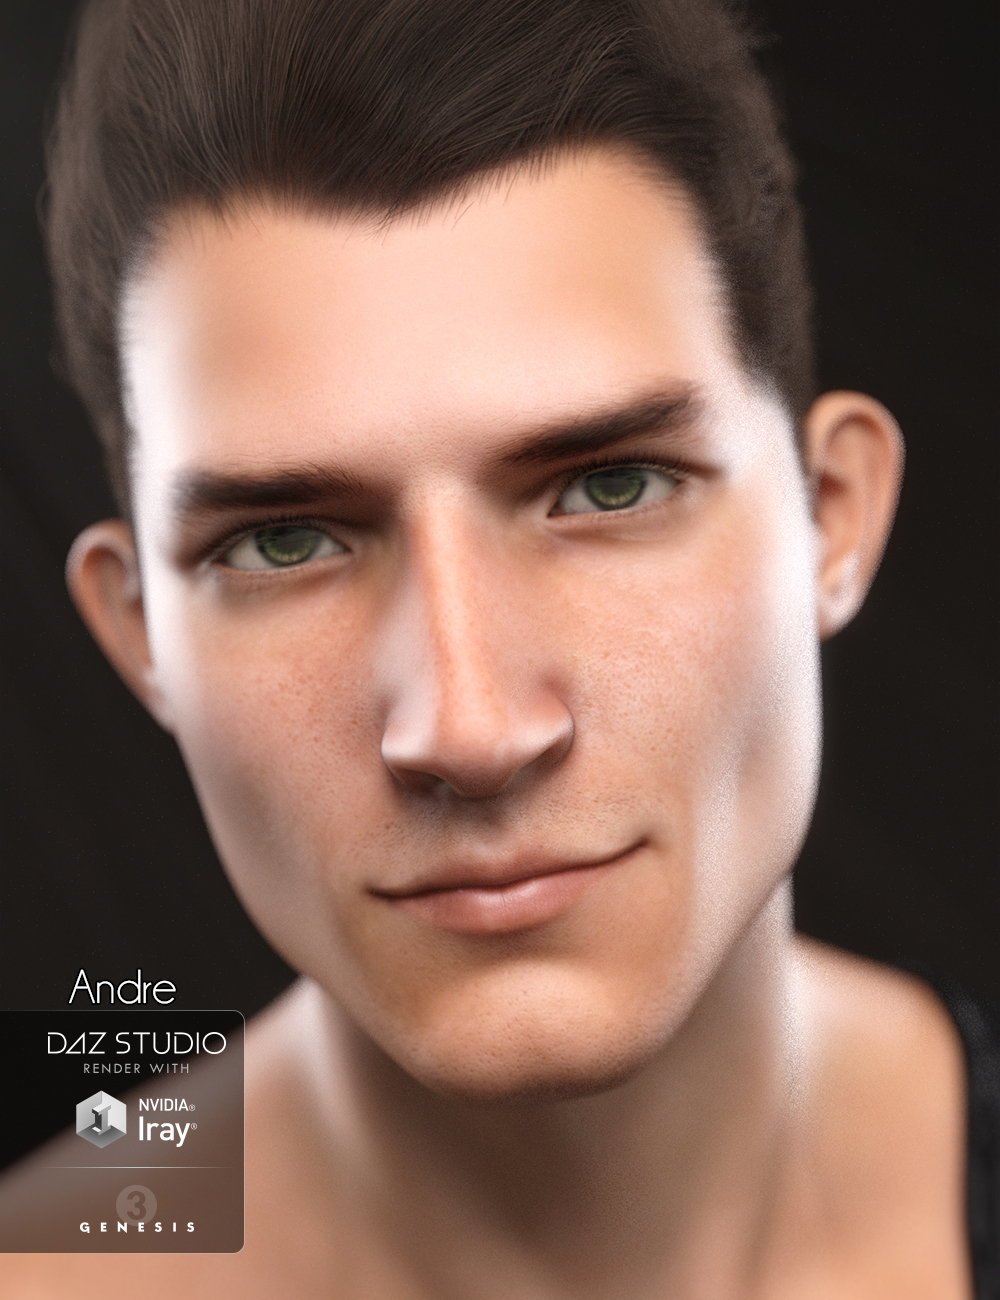 Andre for Genesis 3 and 8 Male by: VincentXyooj, 3D Models by Daz 3D